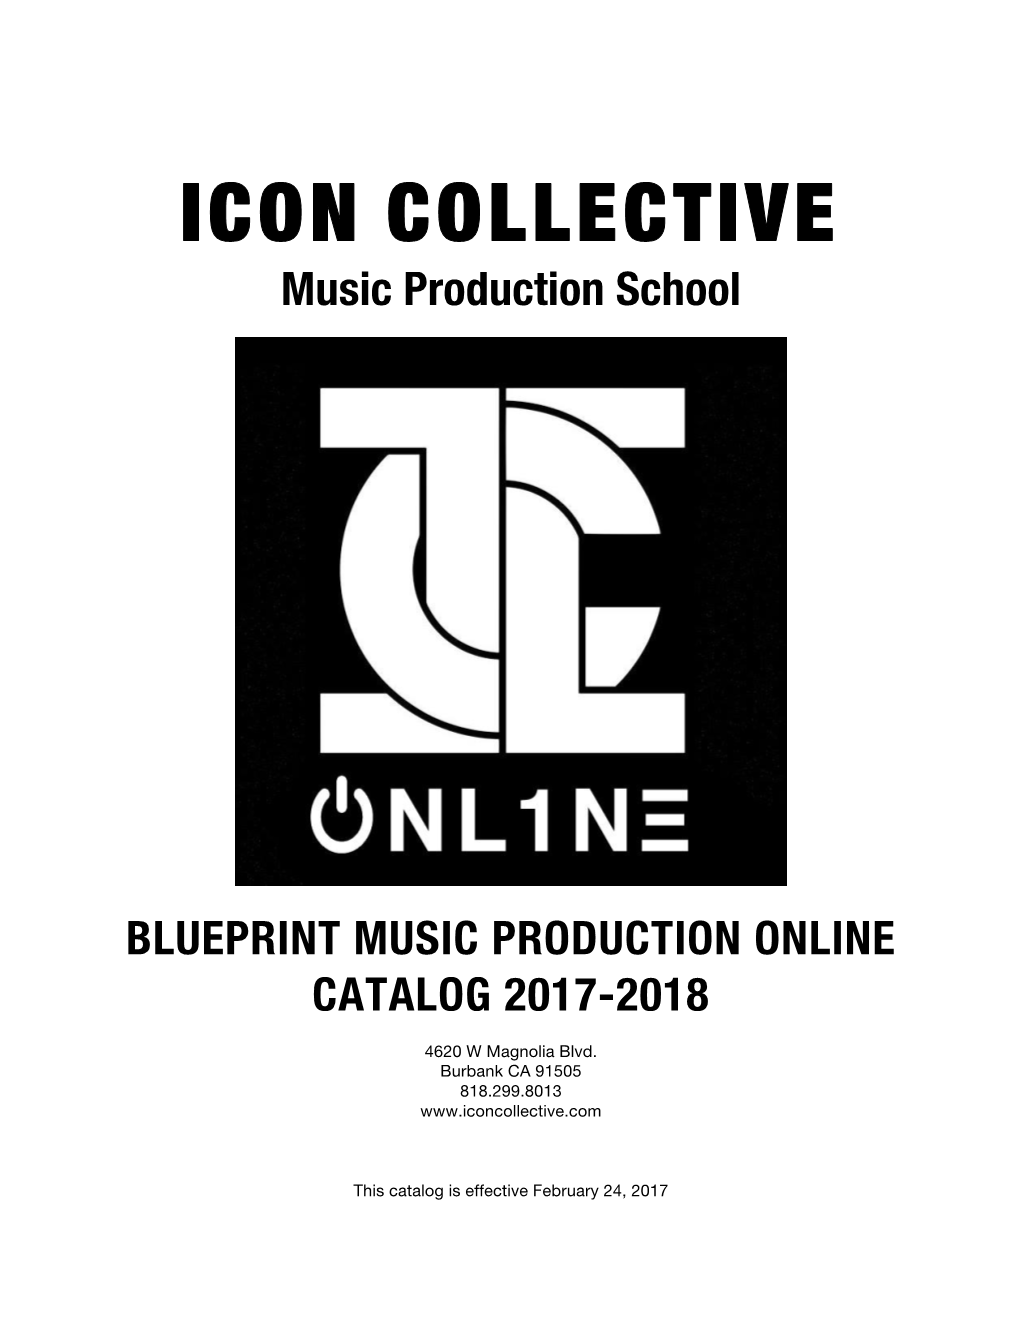 About Icon Collective